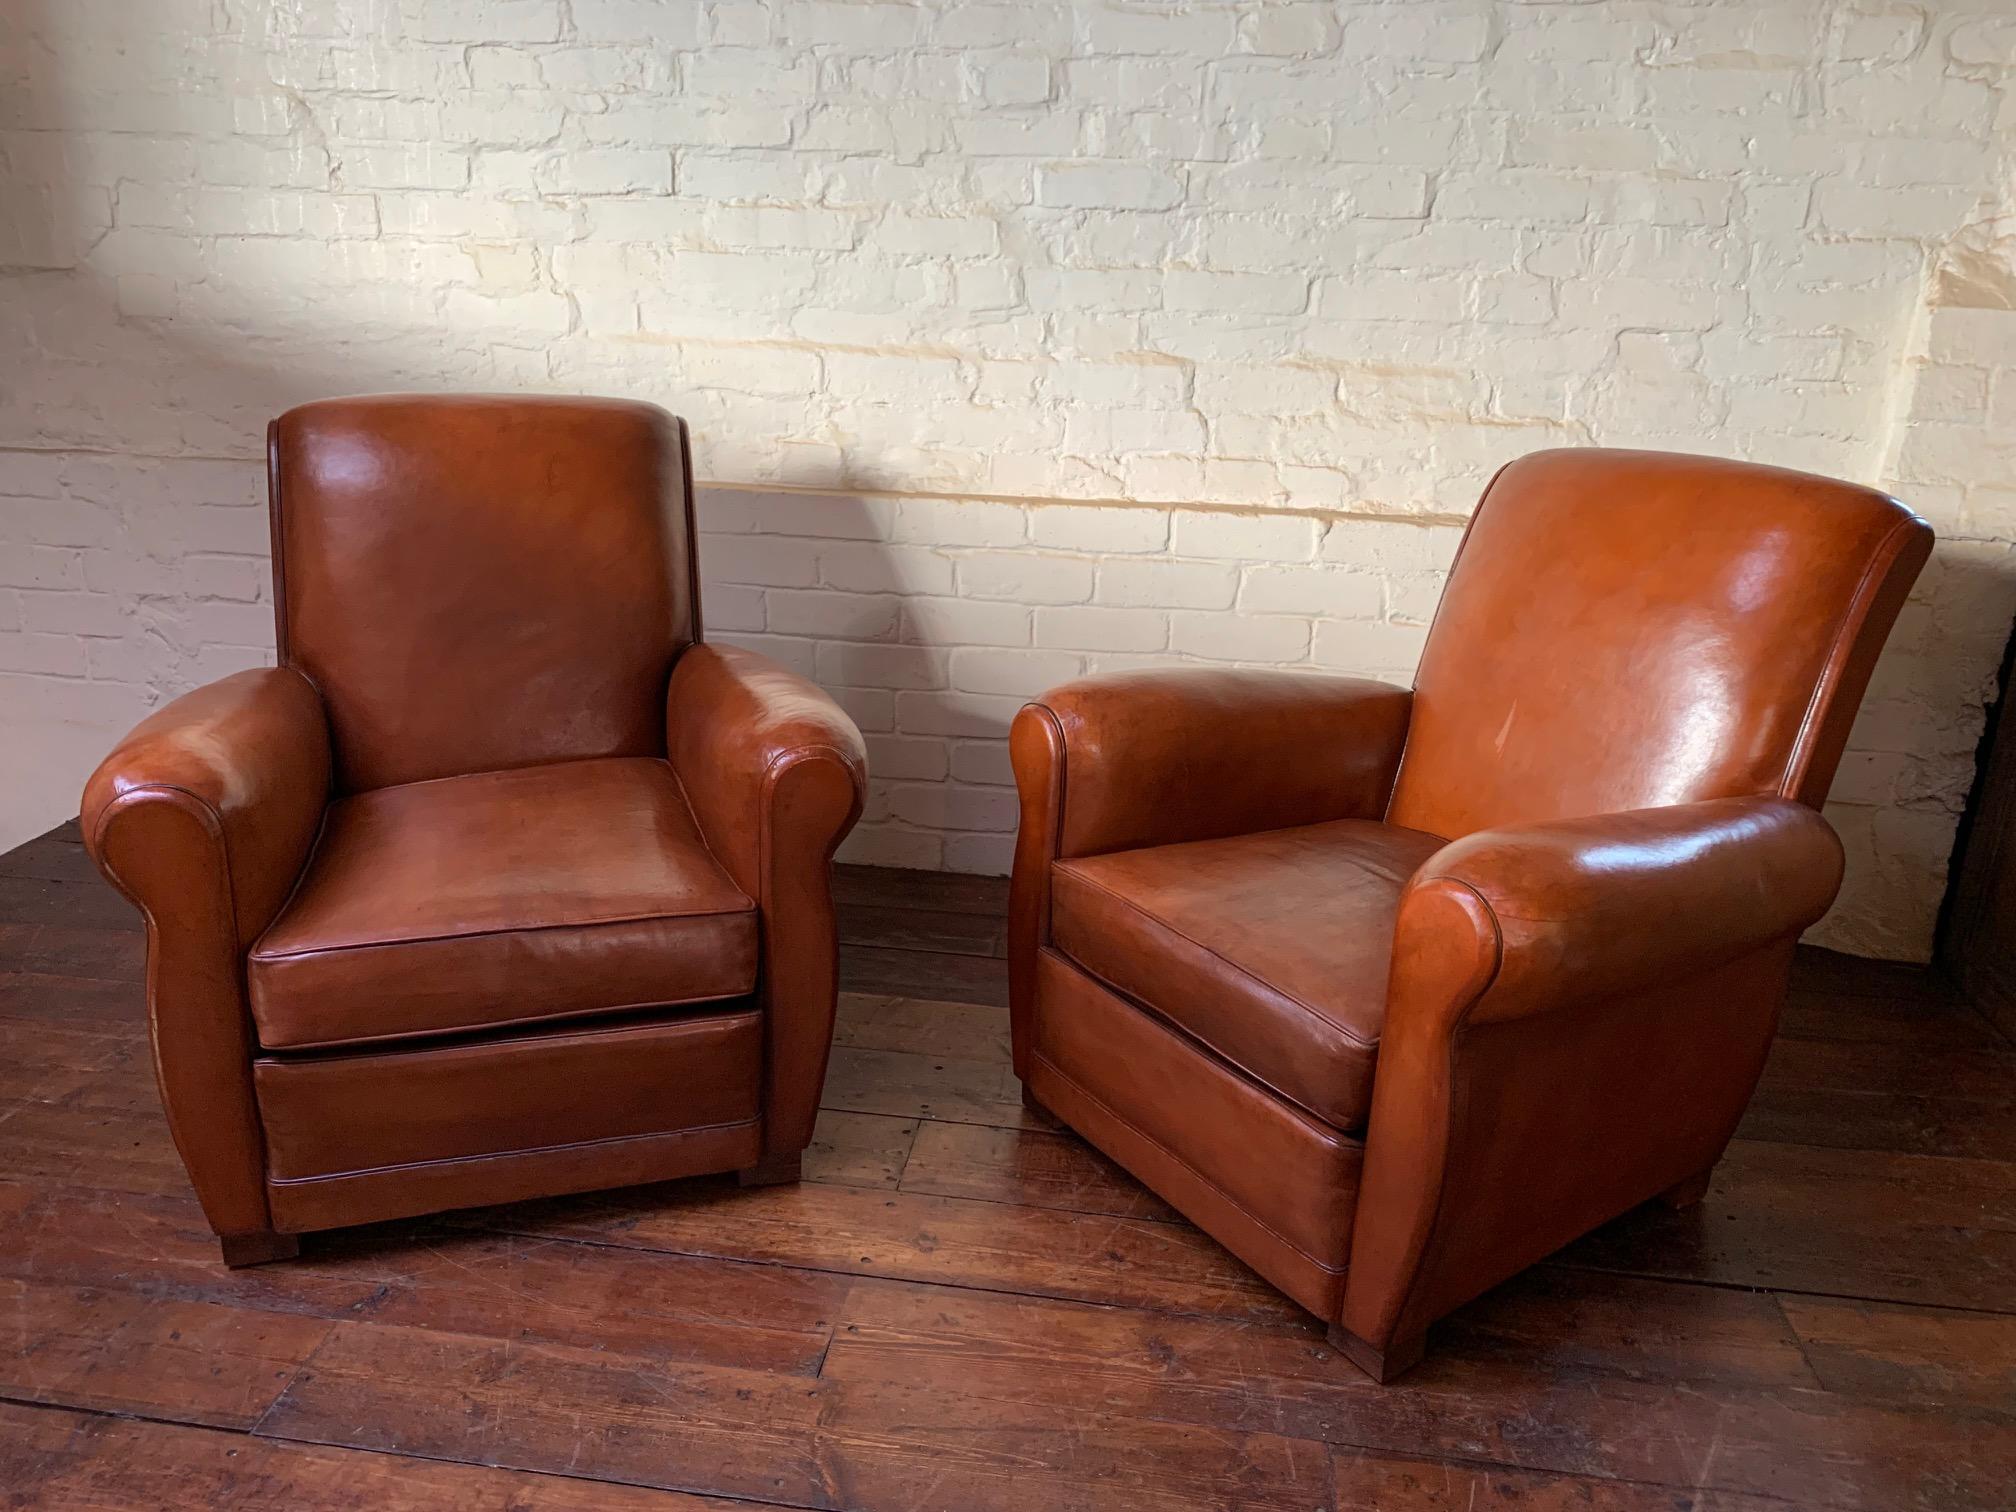 Mid-20th Century A Superb Pair of French, Leather Club Chairs, Havana Lounge Models Circa 1940's